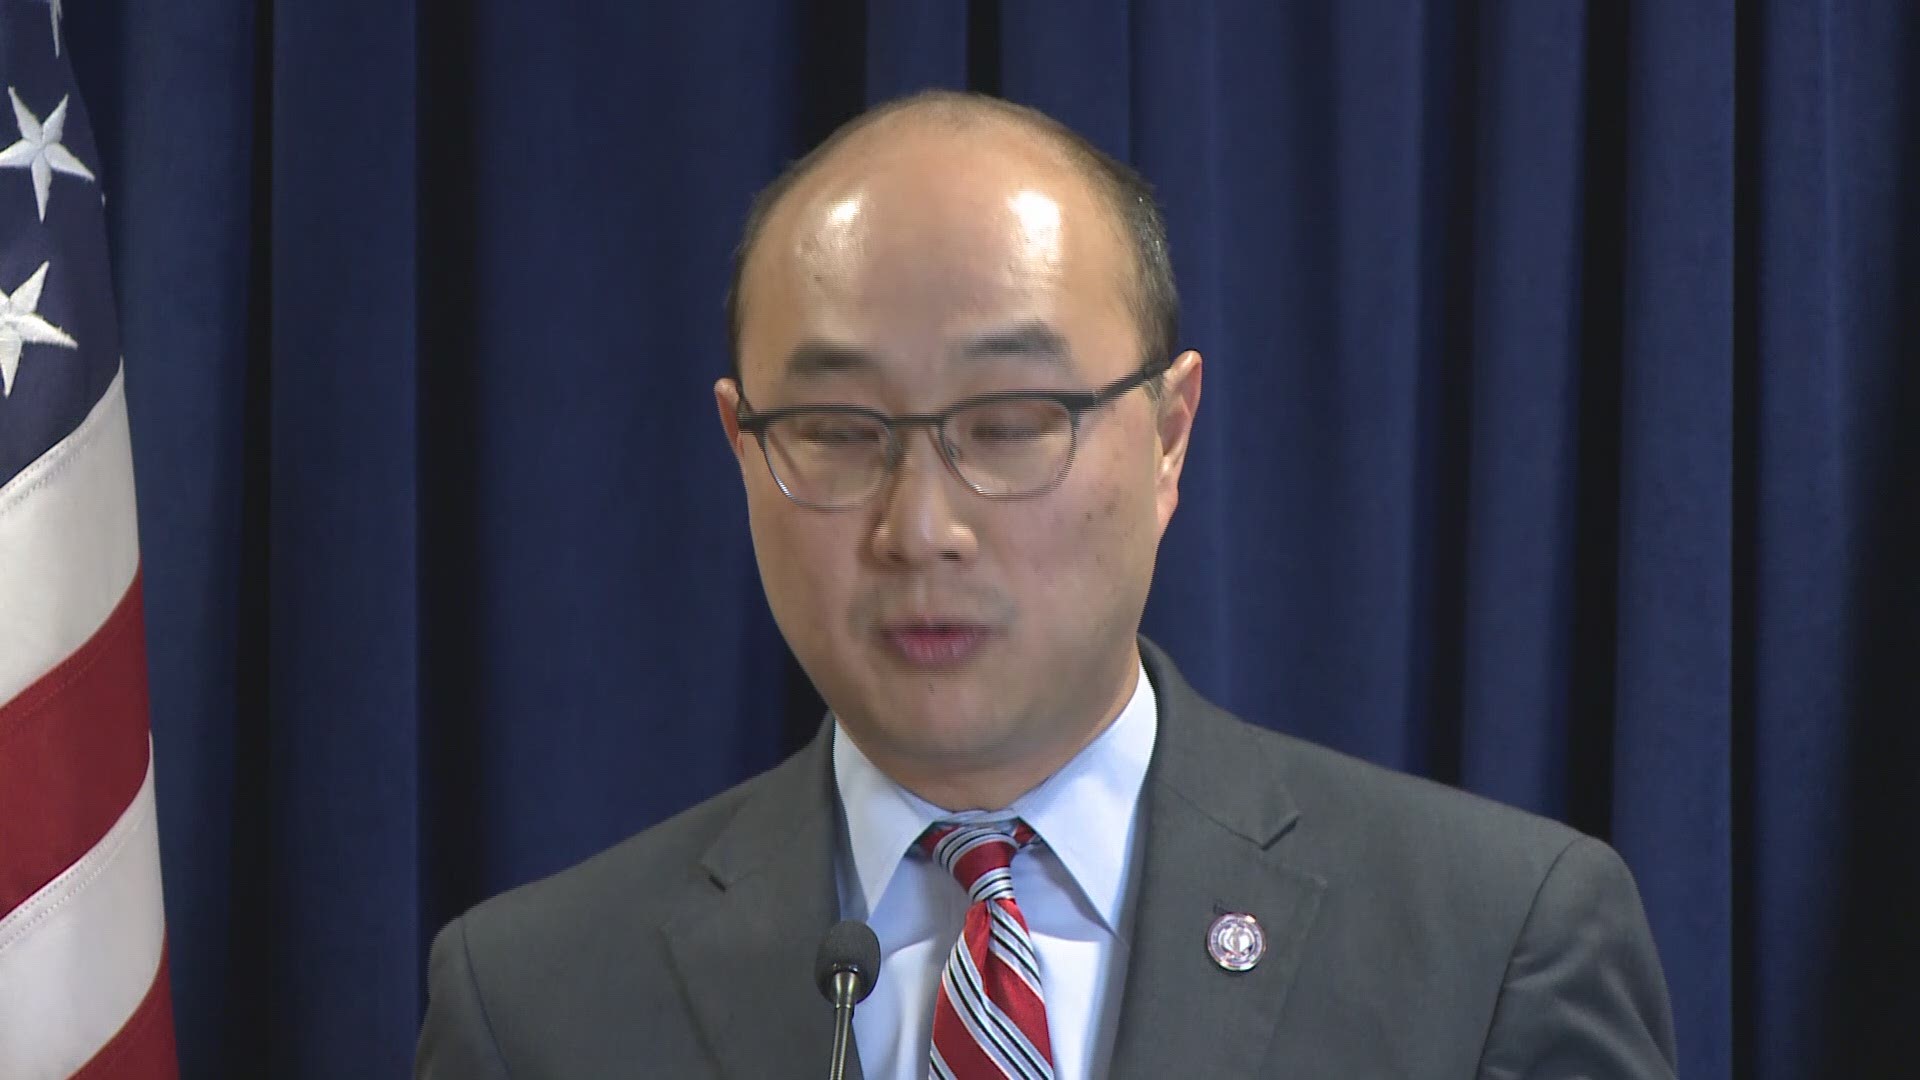 Ramsey Co. Attorney John Choi announces charges in Philando Castile case